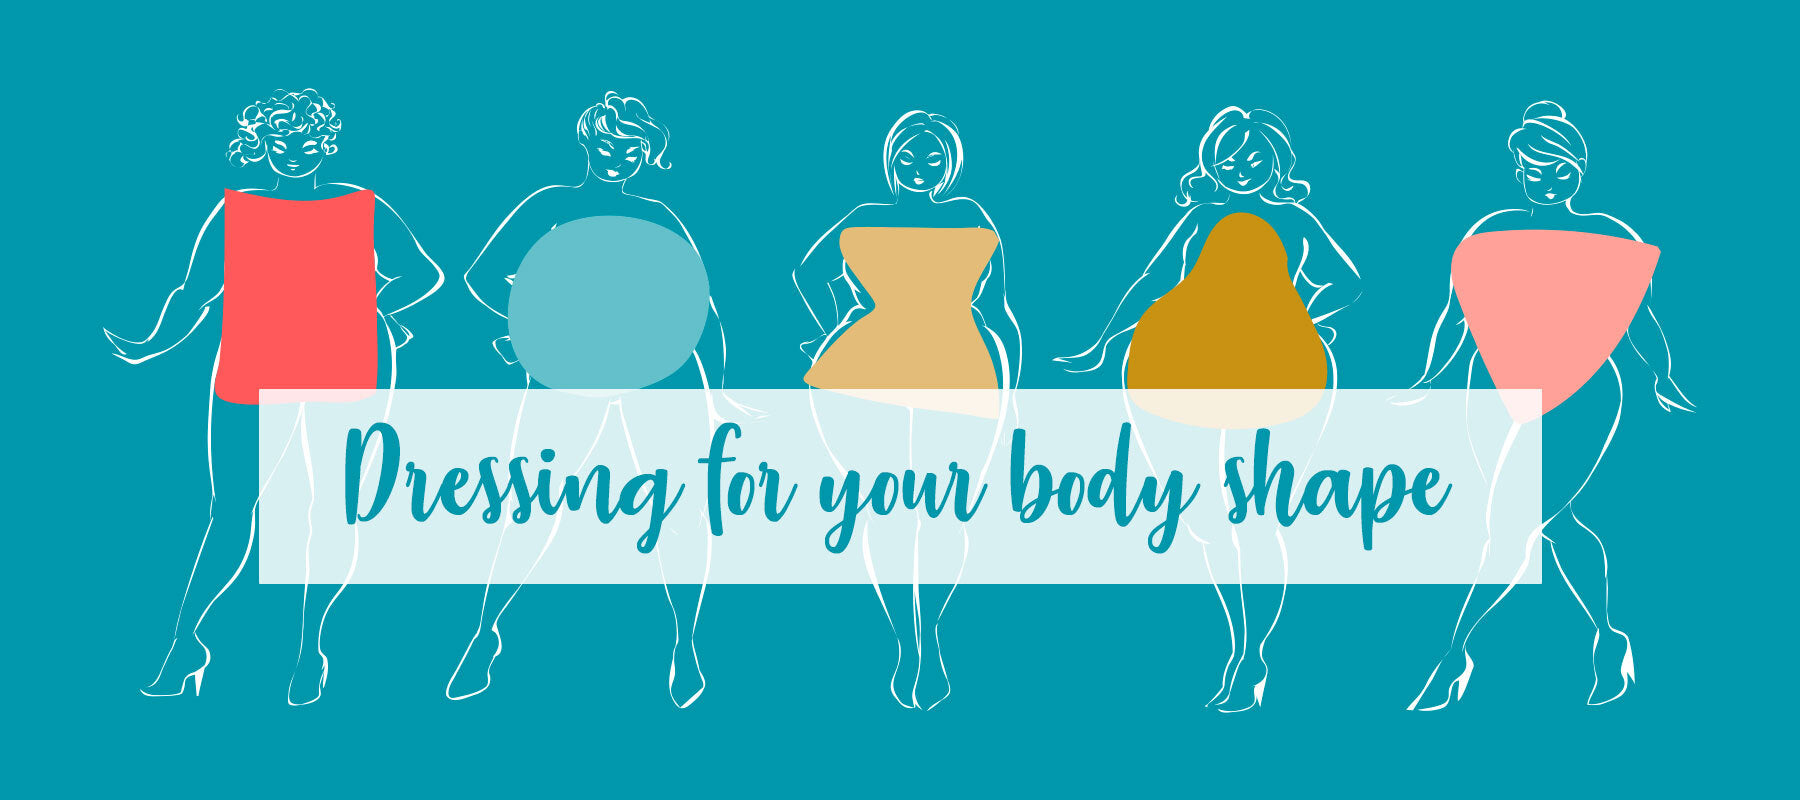 Dress for Your Body Shape